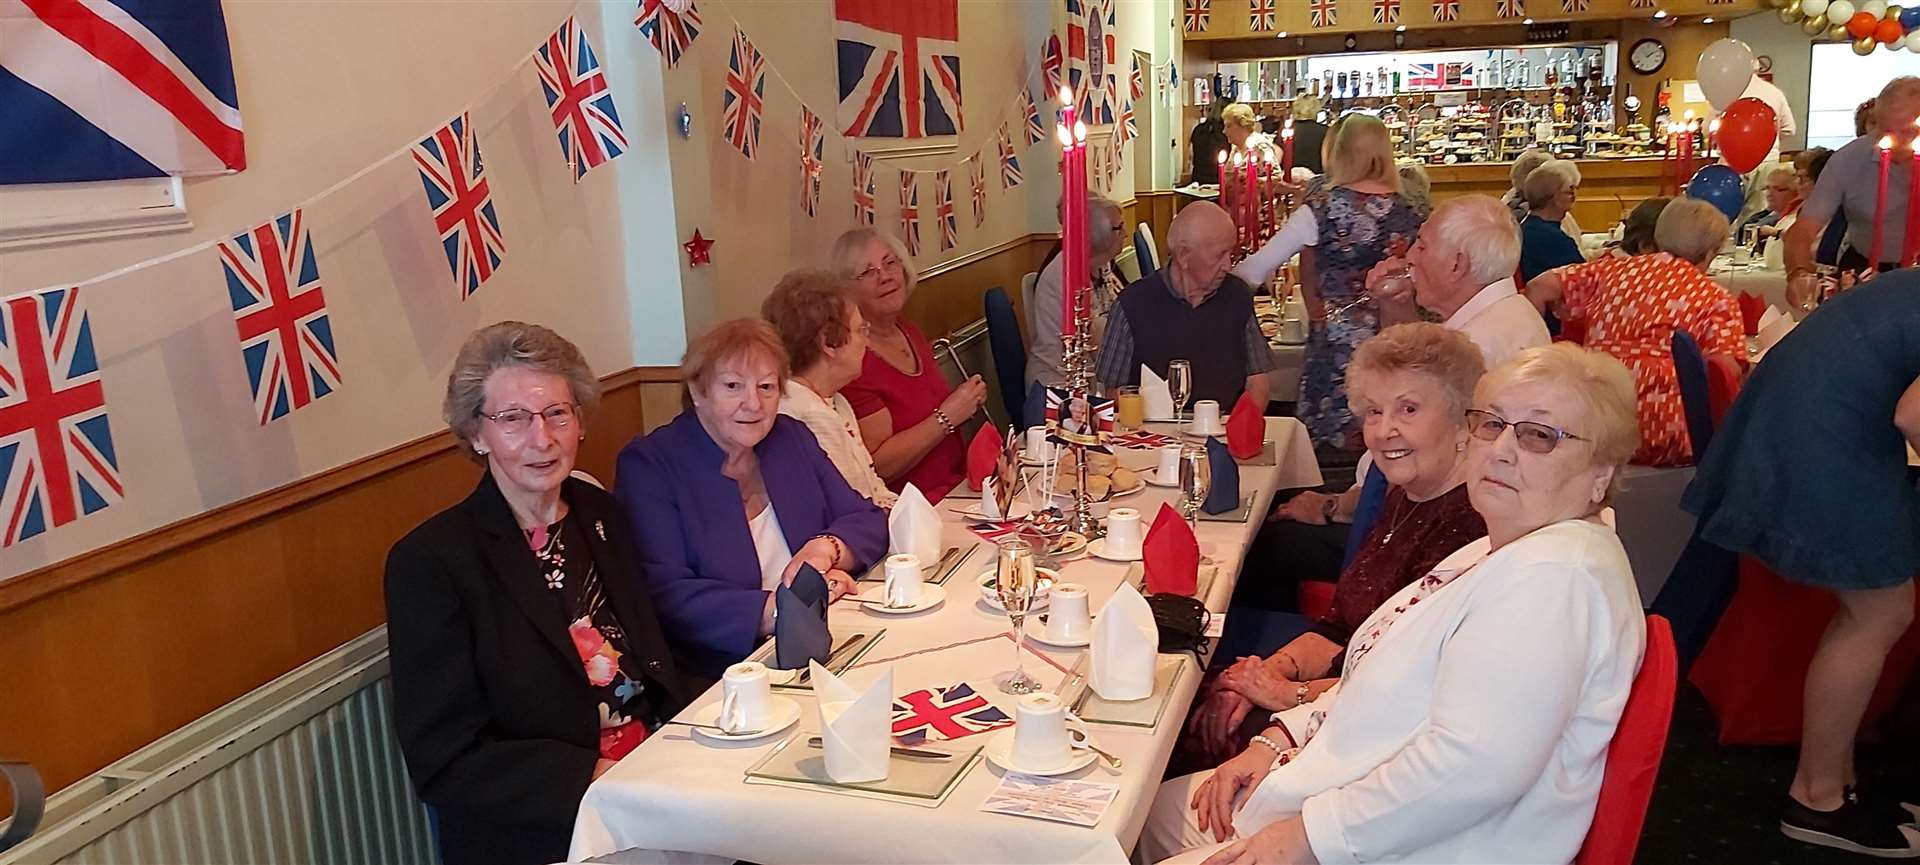 Local businesses supported the tea party organised by Cllr James Allan.